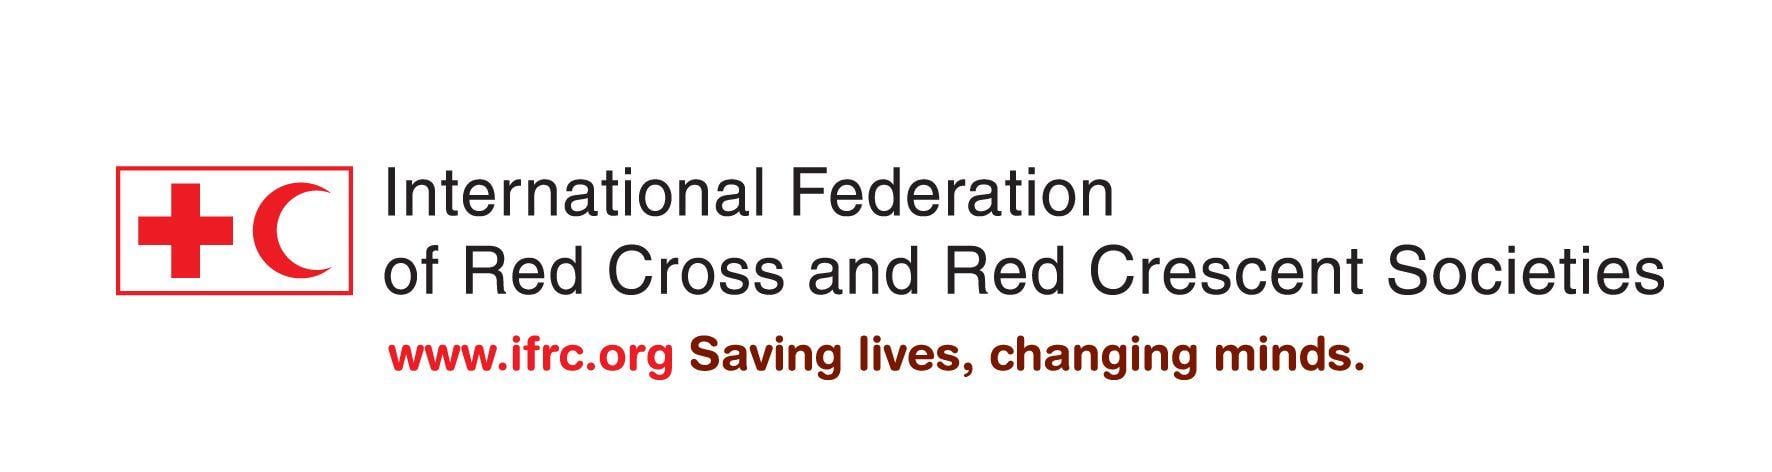 Ifrc Logo - Sri Lanka Red Cross | International Federation of Red Cross and Red ...